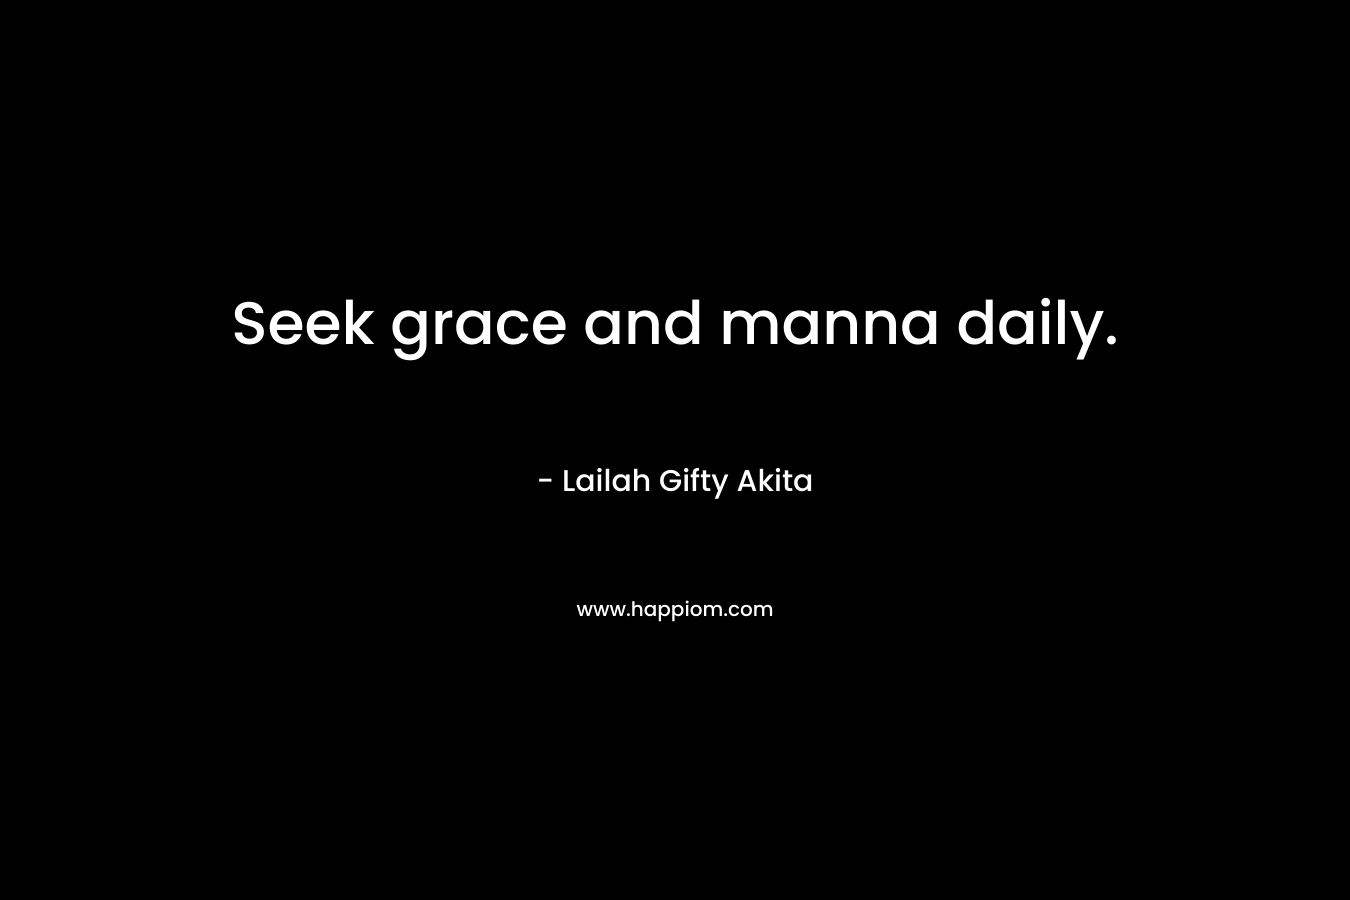 Seek grace and manna daily. – Lailah Gifty Akita